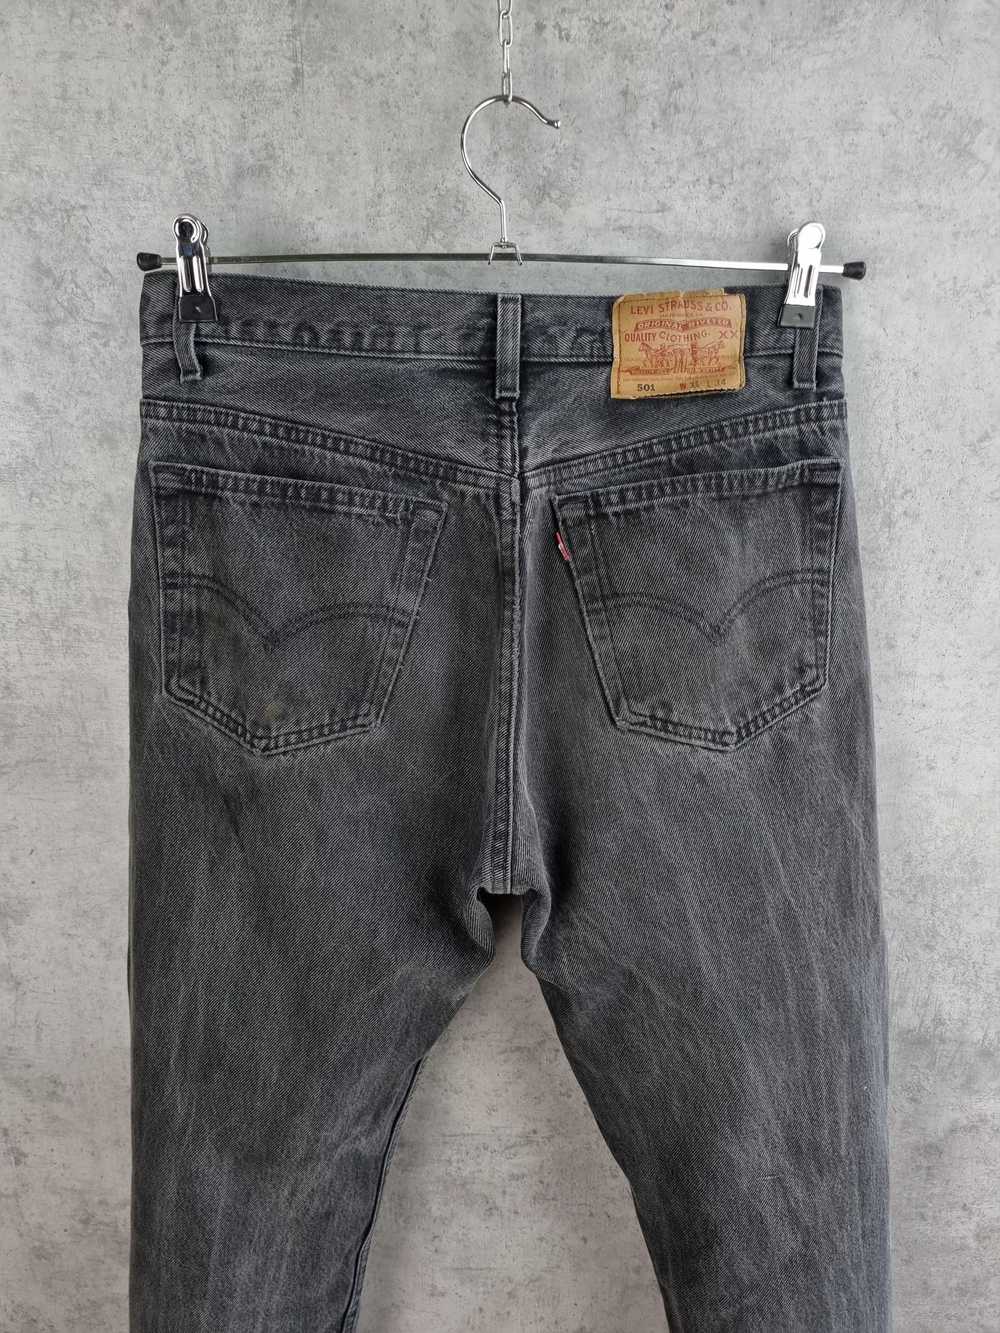 Levi's × Levi's Vintage Clothing × Made In Usa Le… - image 6